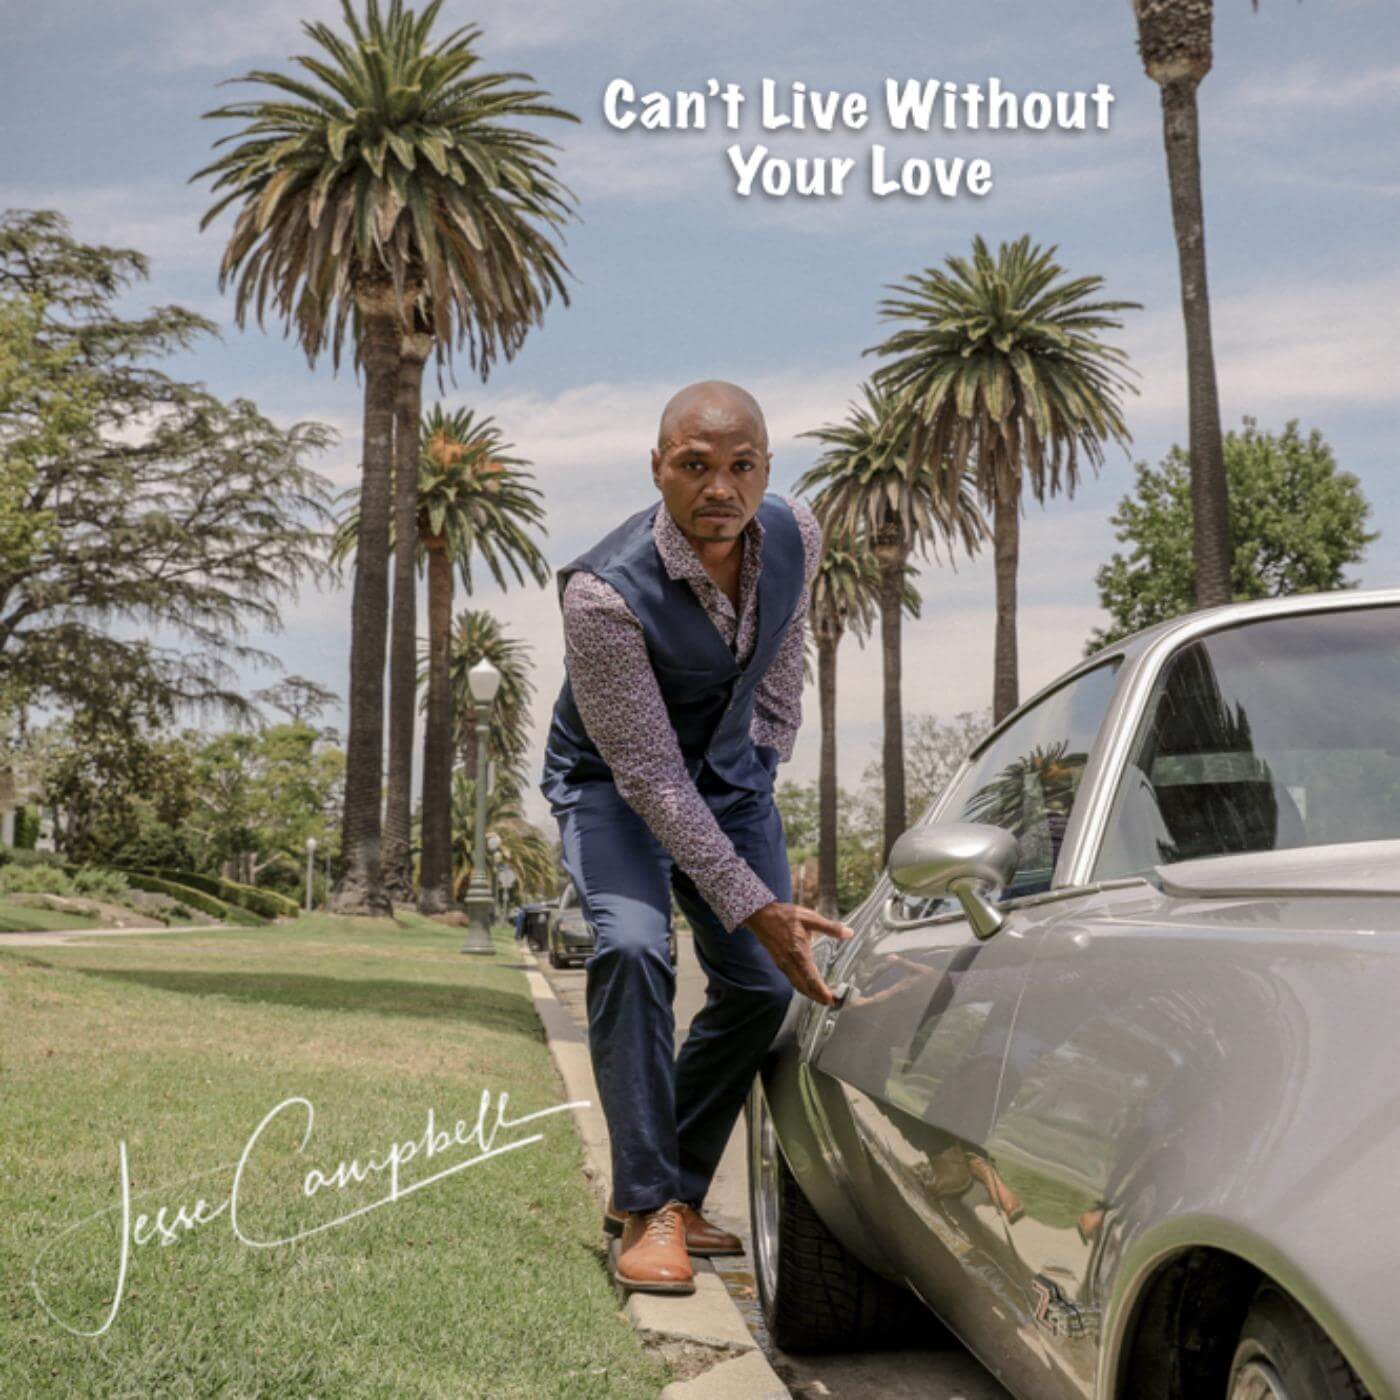 'Can’t Live Without Your Love' by Jesse Campbell